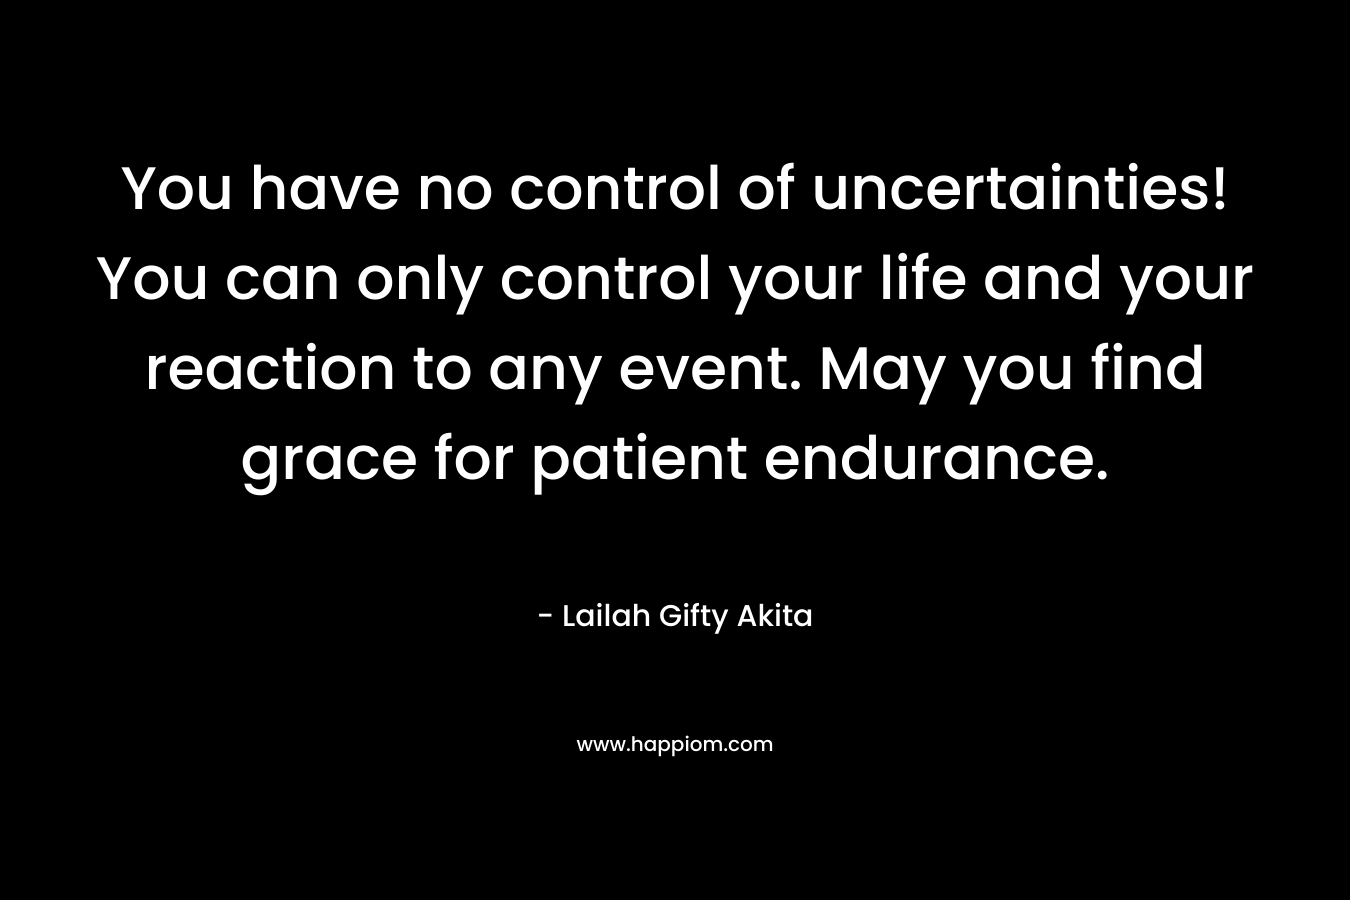 You have no control of uncertainties! You can only control your life and your reaction to any event. May you find grace for patient endurance.